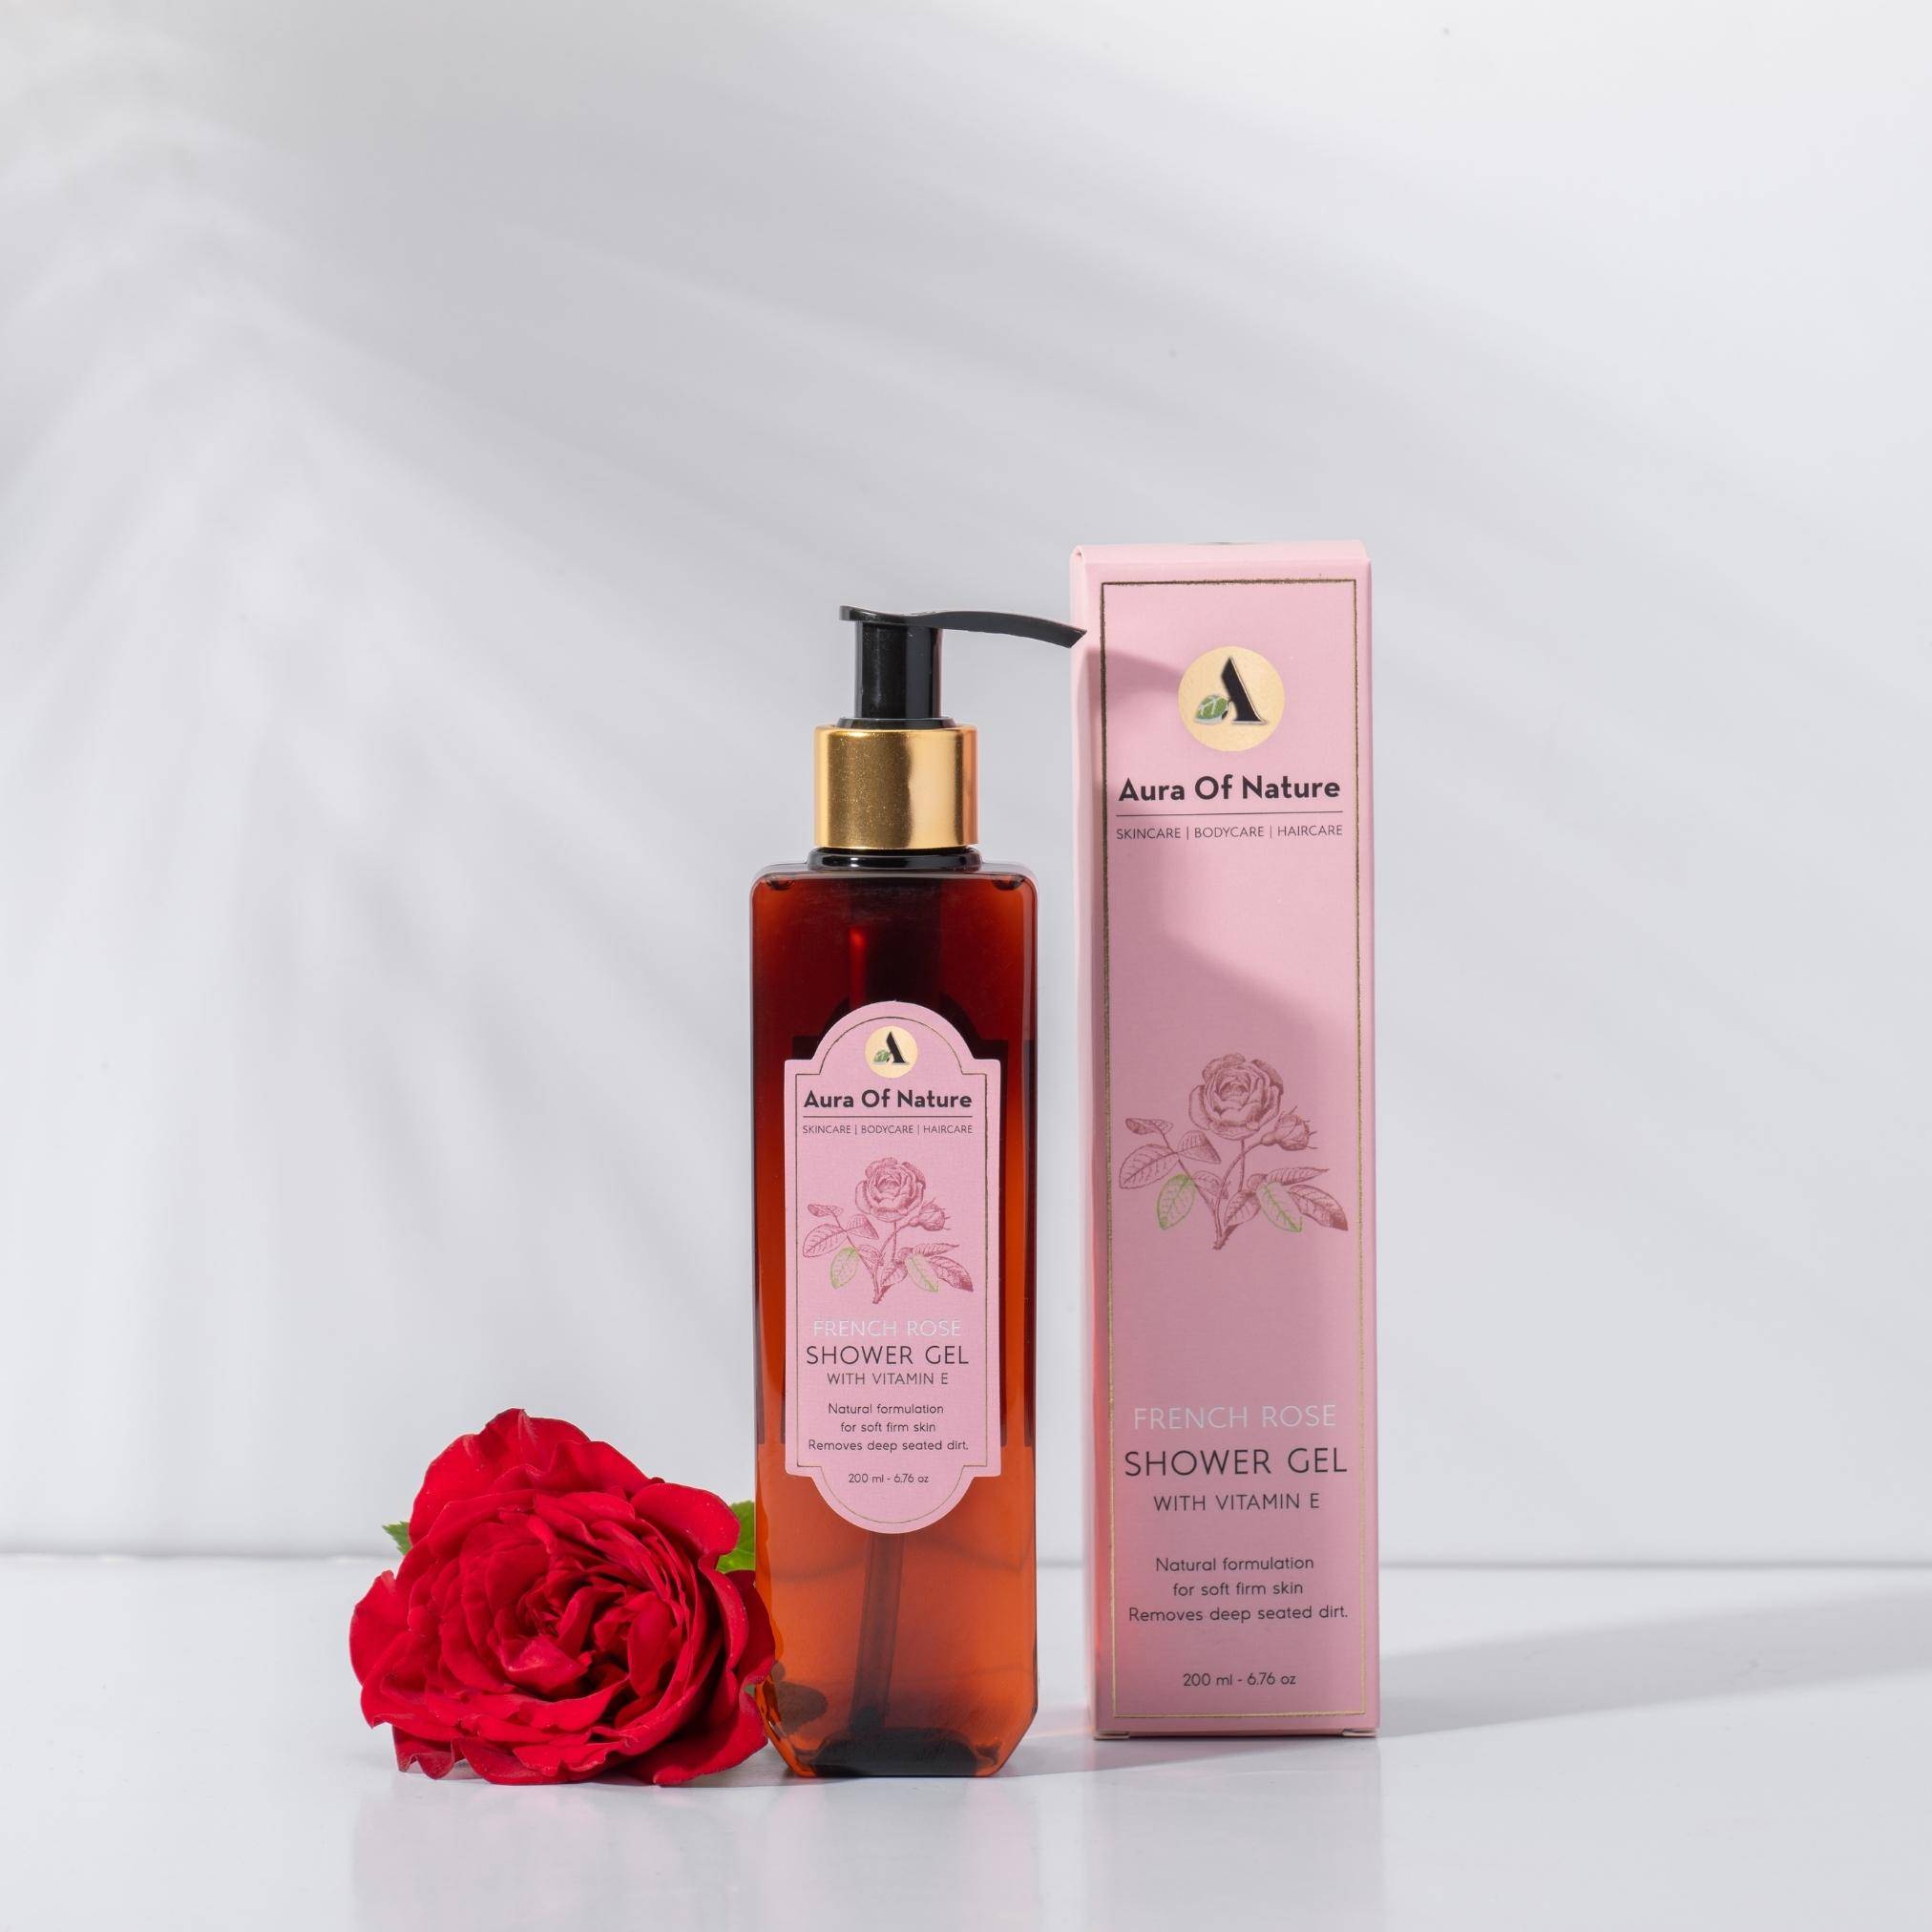 French Rose Shower Gel - Aura Of Nature